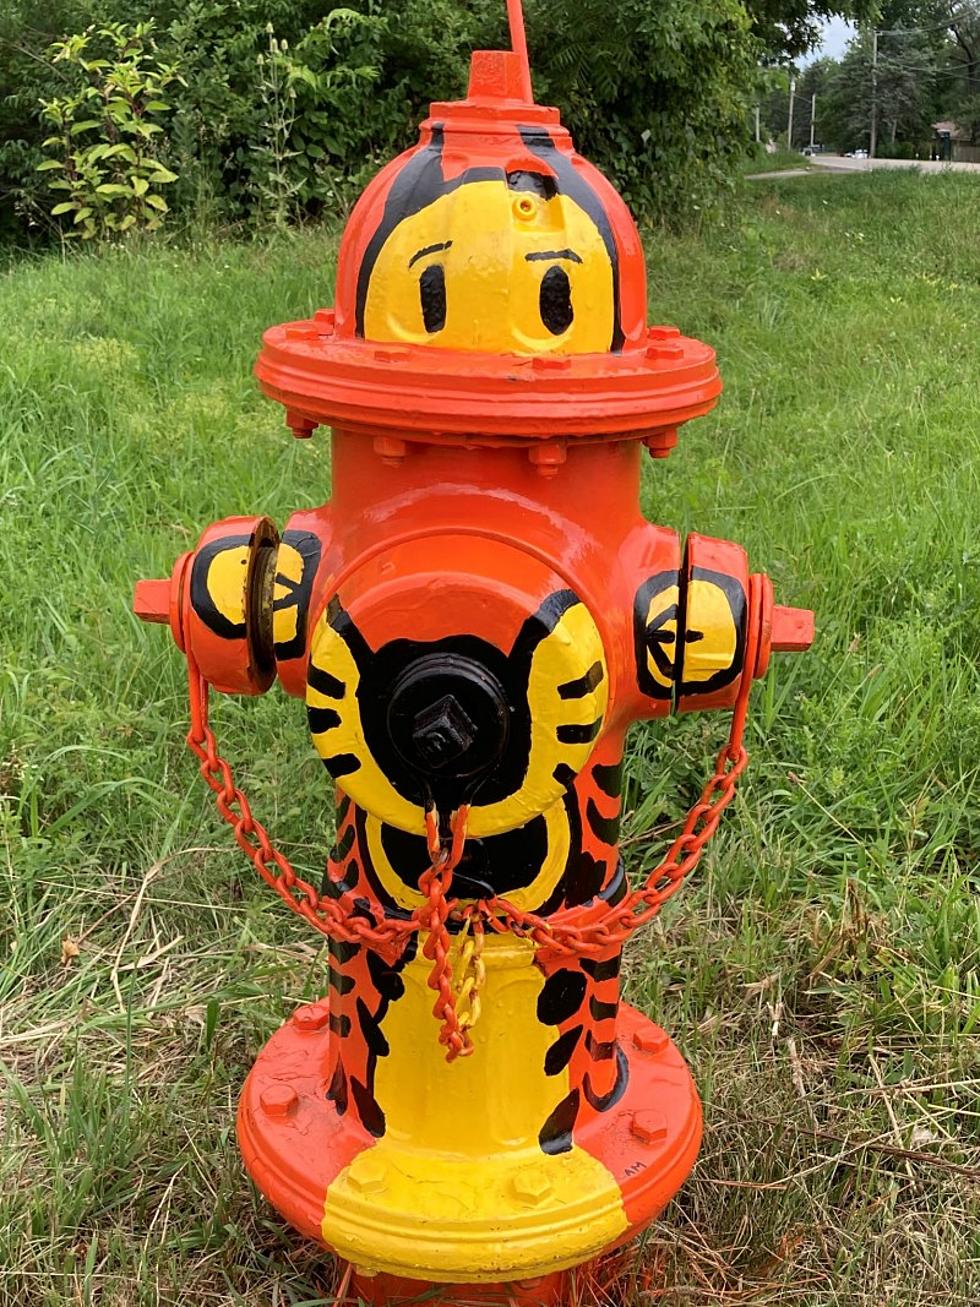 The Streets of One Illinois Community Are Ablaze With Fabulous Fire Hydrants